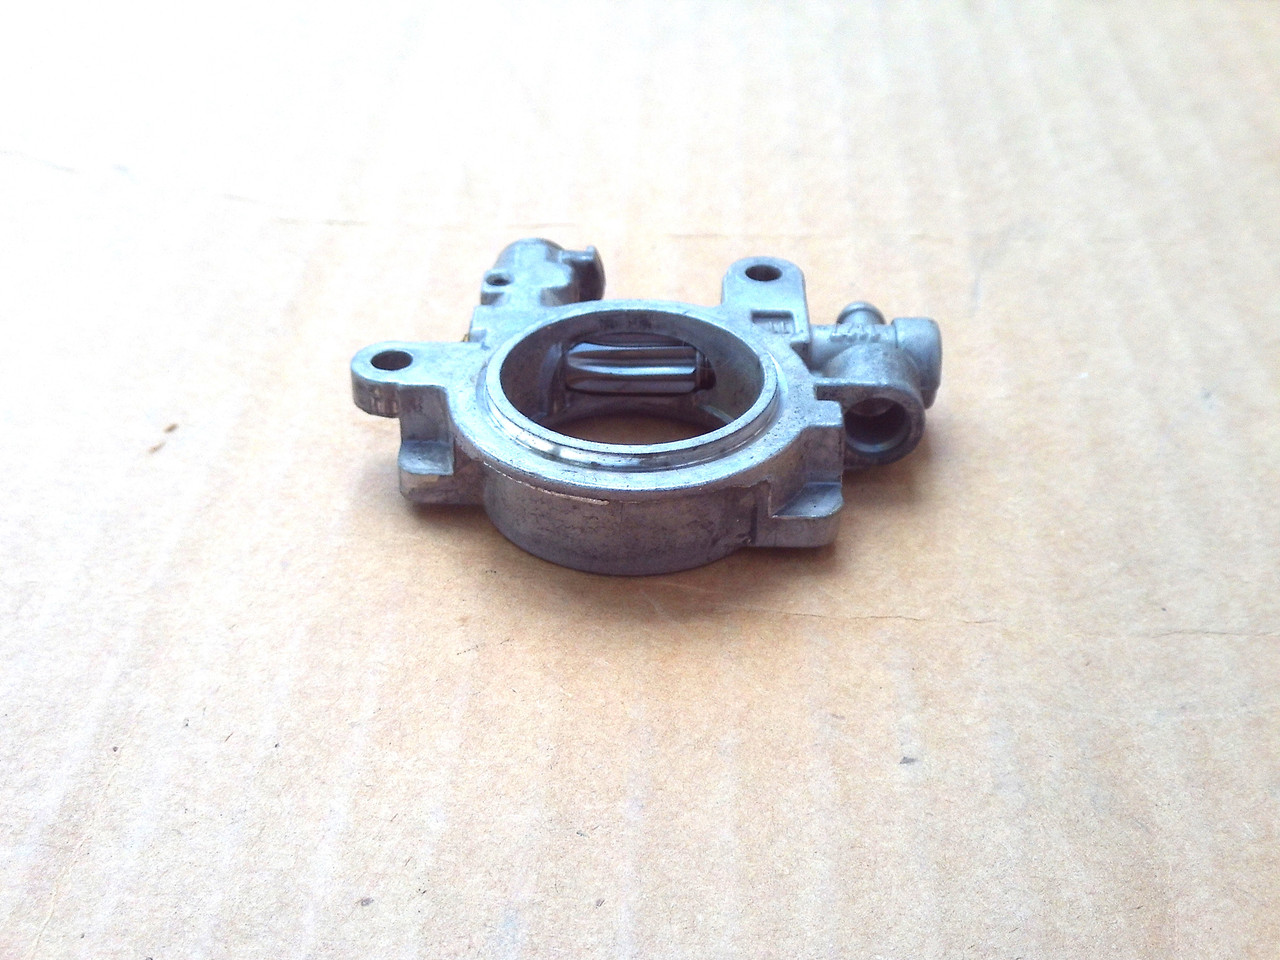 Oil Pump for Stihl MS290 MS390 MS310 MS311 MS391 MS390 029 039 1127 640 3204 1127 640 3200 1127-640-3200